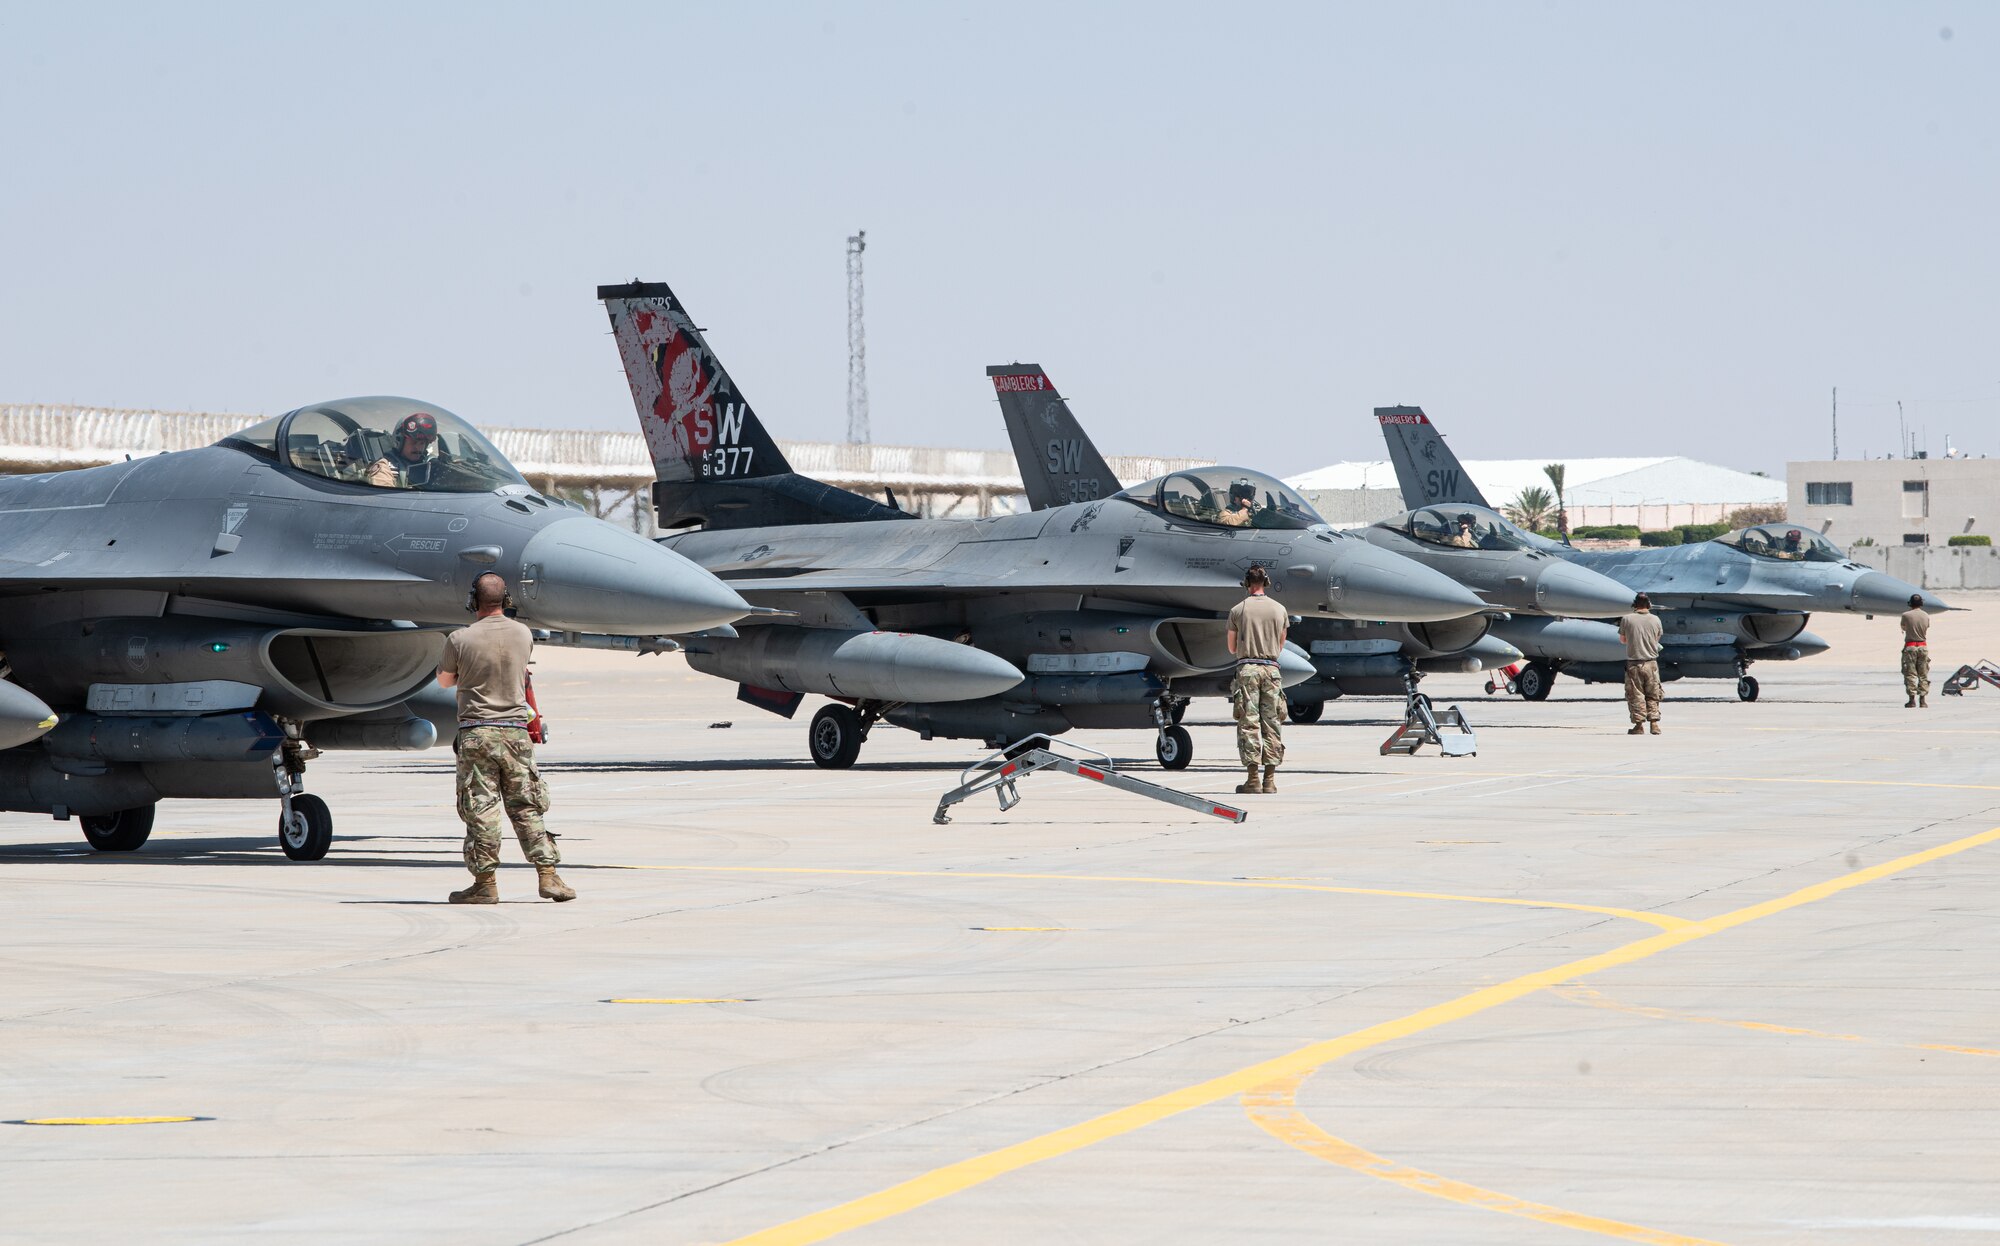 Crew chiefs from the 77th Fighter Generation Squadron and 77th Expeditionary Fighter Squadron pilots prepare for flight during an Agile Combat Employment capstone event March 5, 2021, at an airbase in the Kingdom of Saudi Arabia.